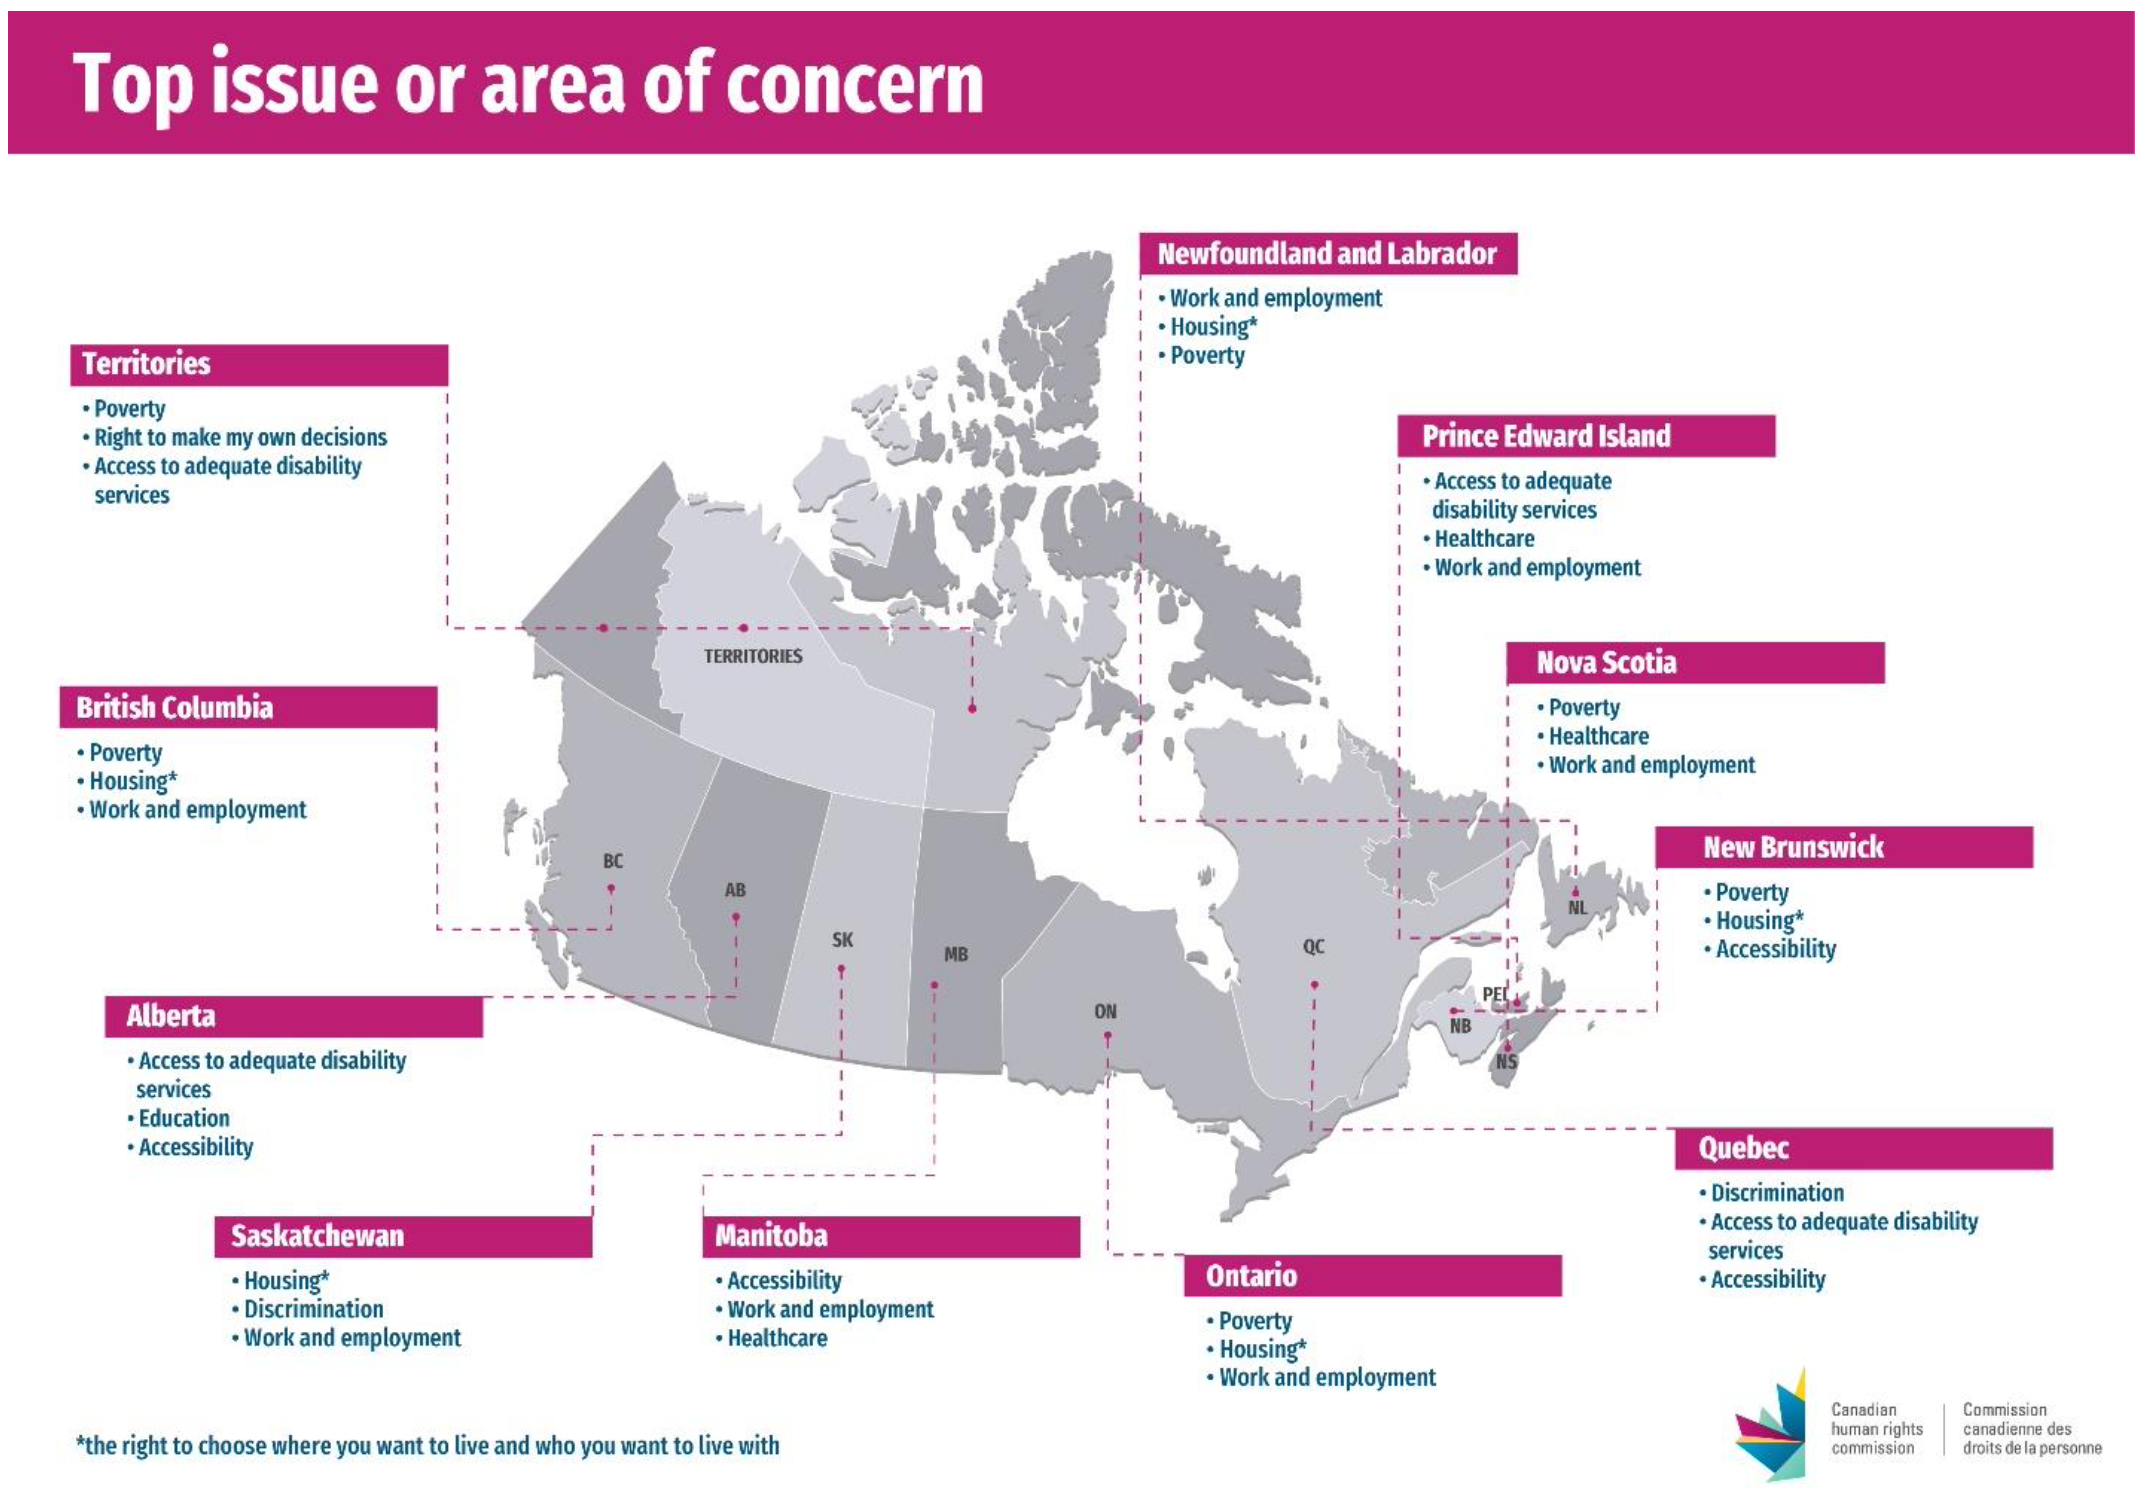 This is a geographic map graphic of Canada displaying the top areas of concern for respondents by region.